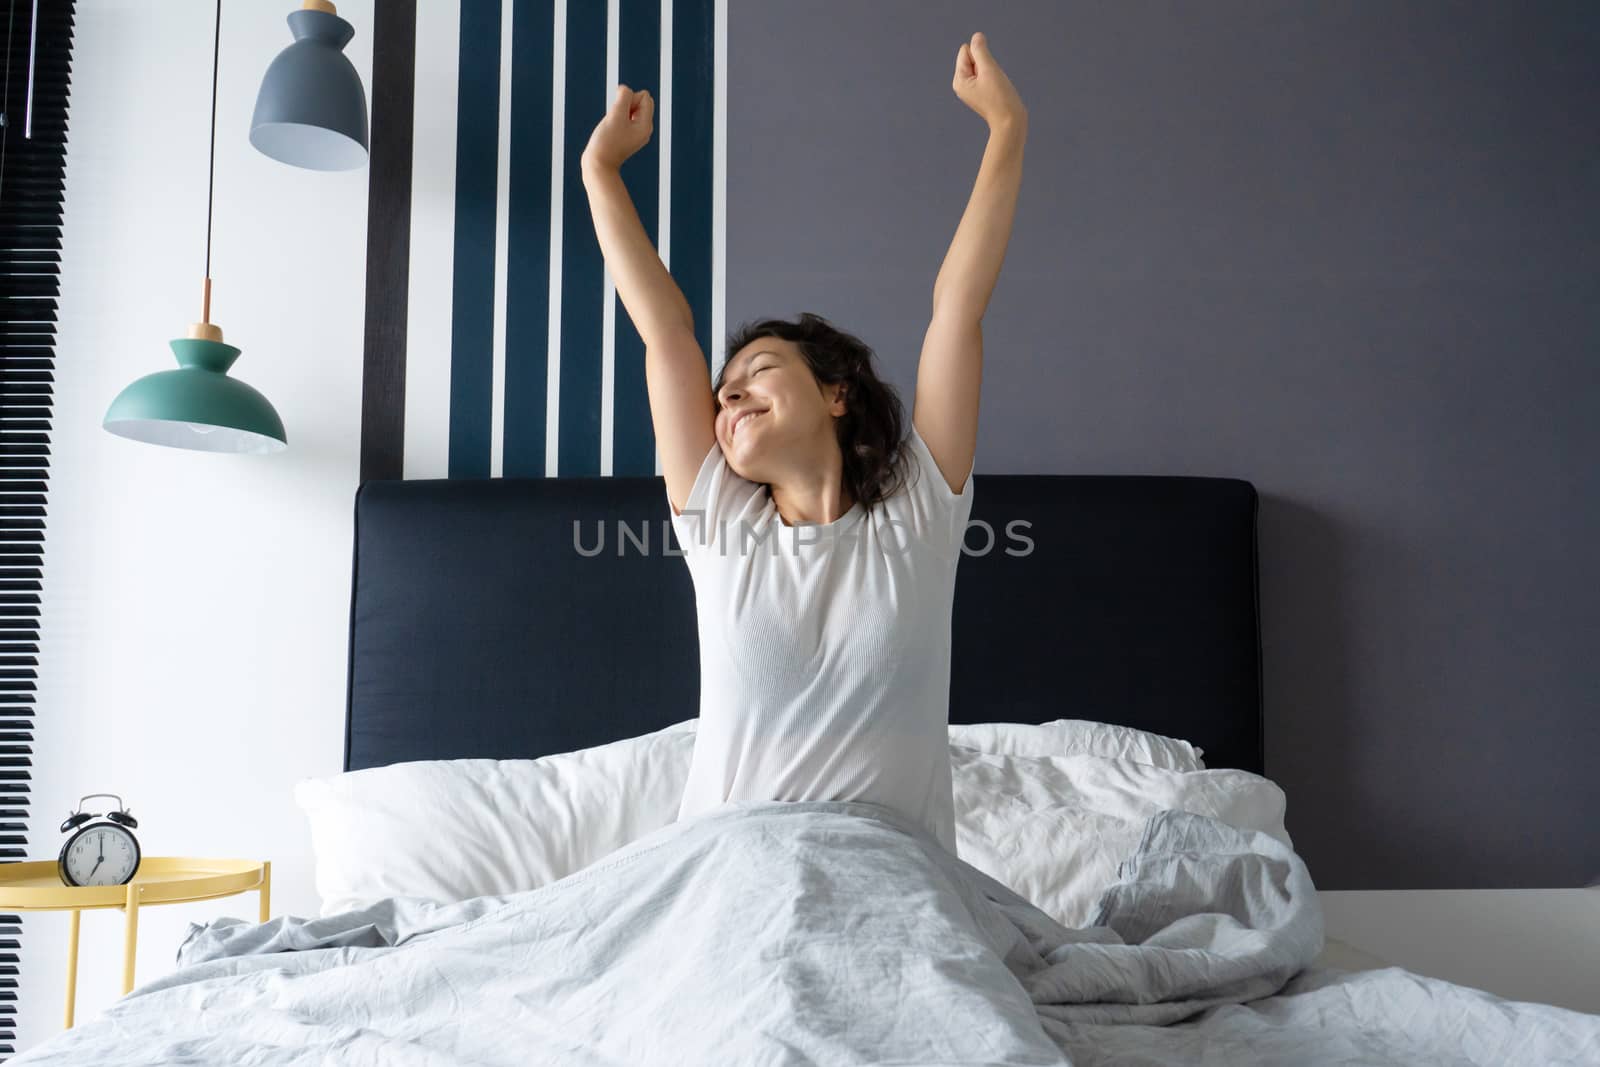 Beautiful girl wakes up in a good mood in a stylish apartment. Stretches with a smile starting the day.